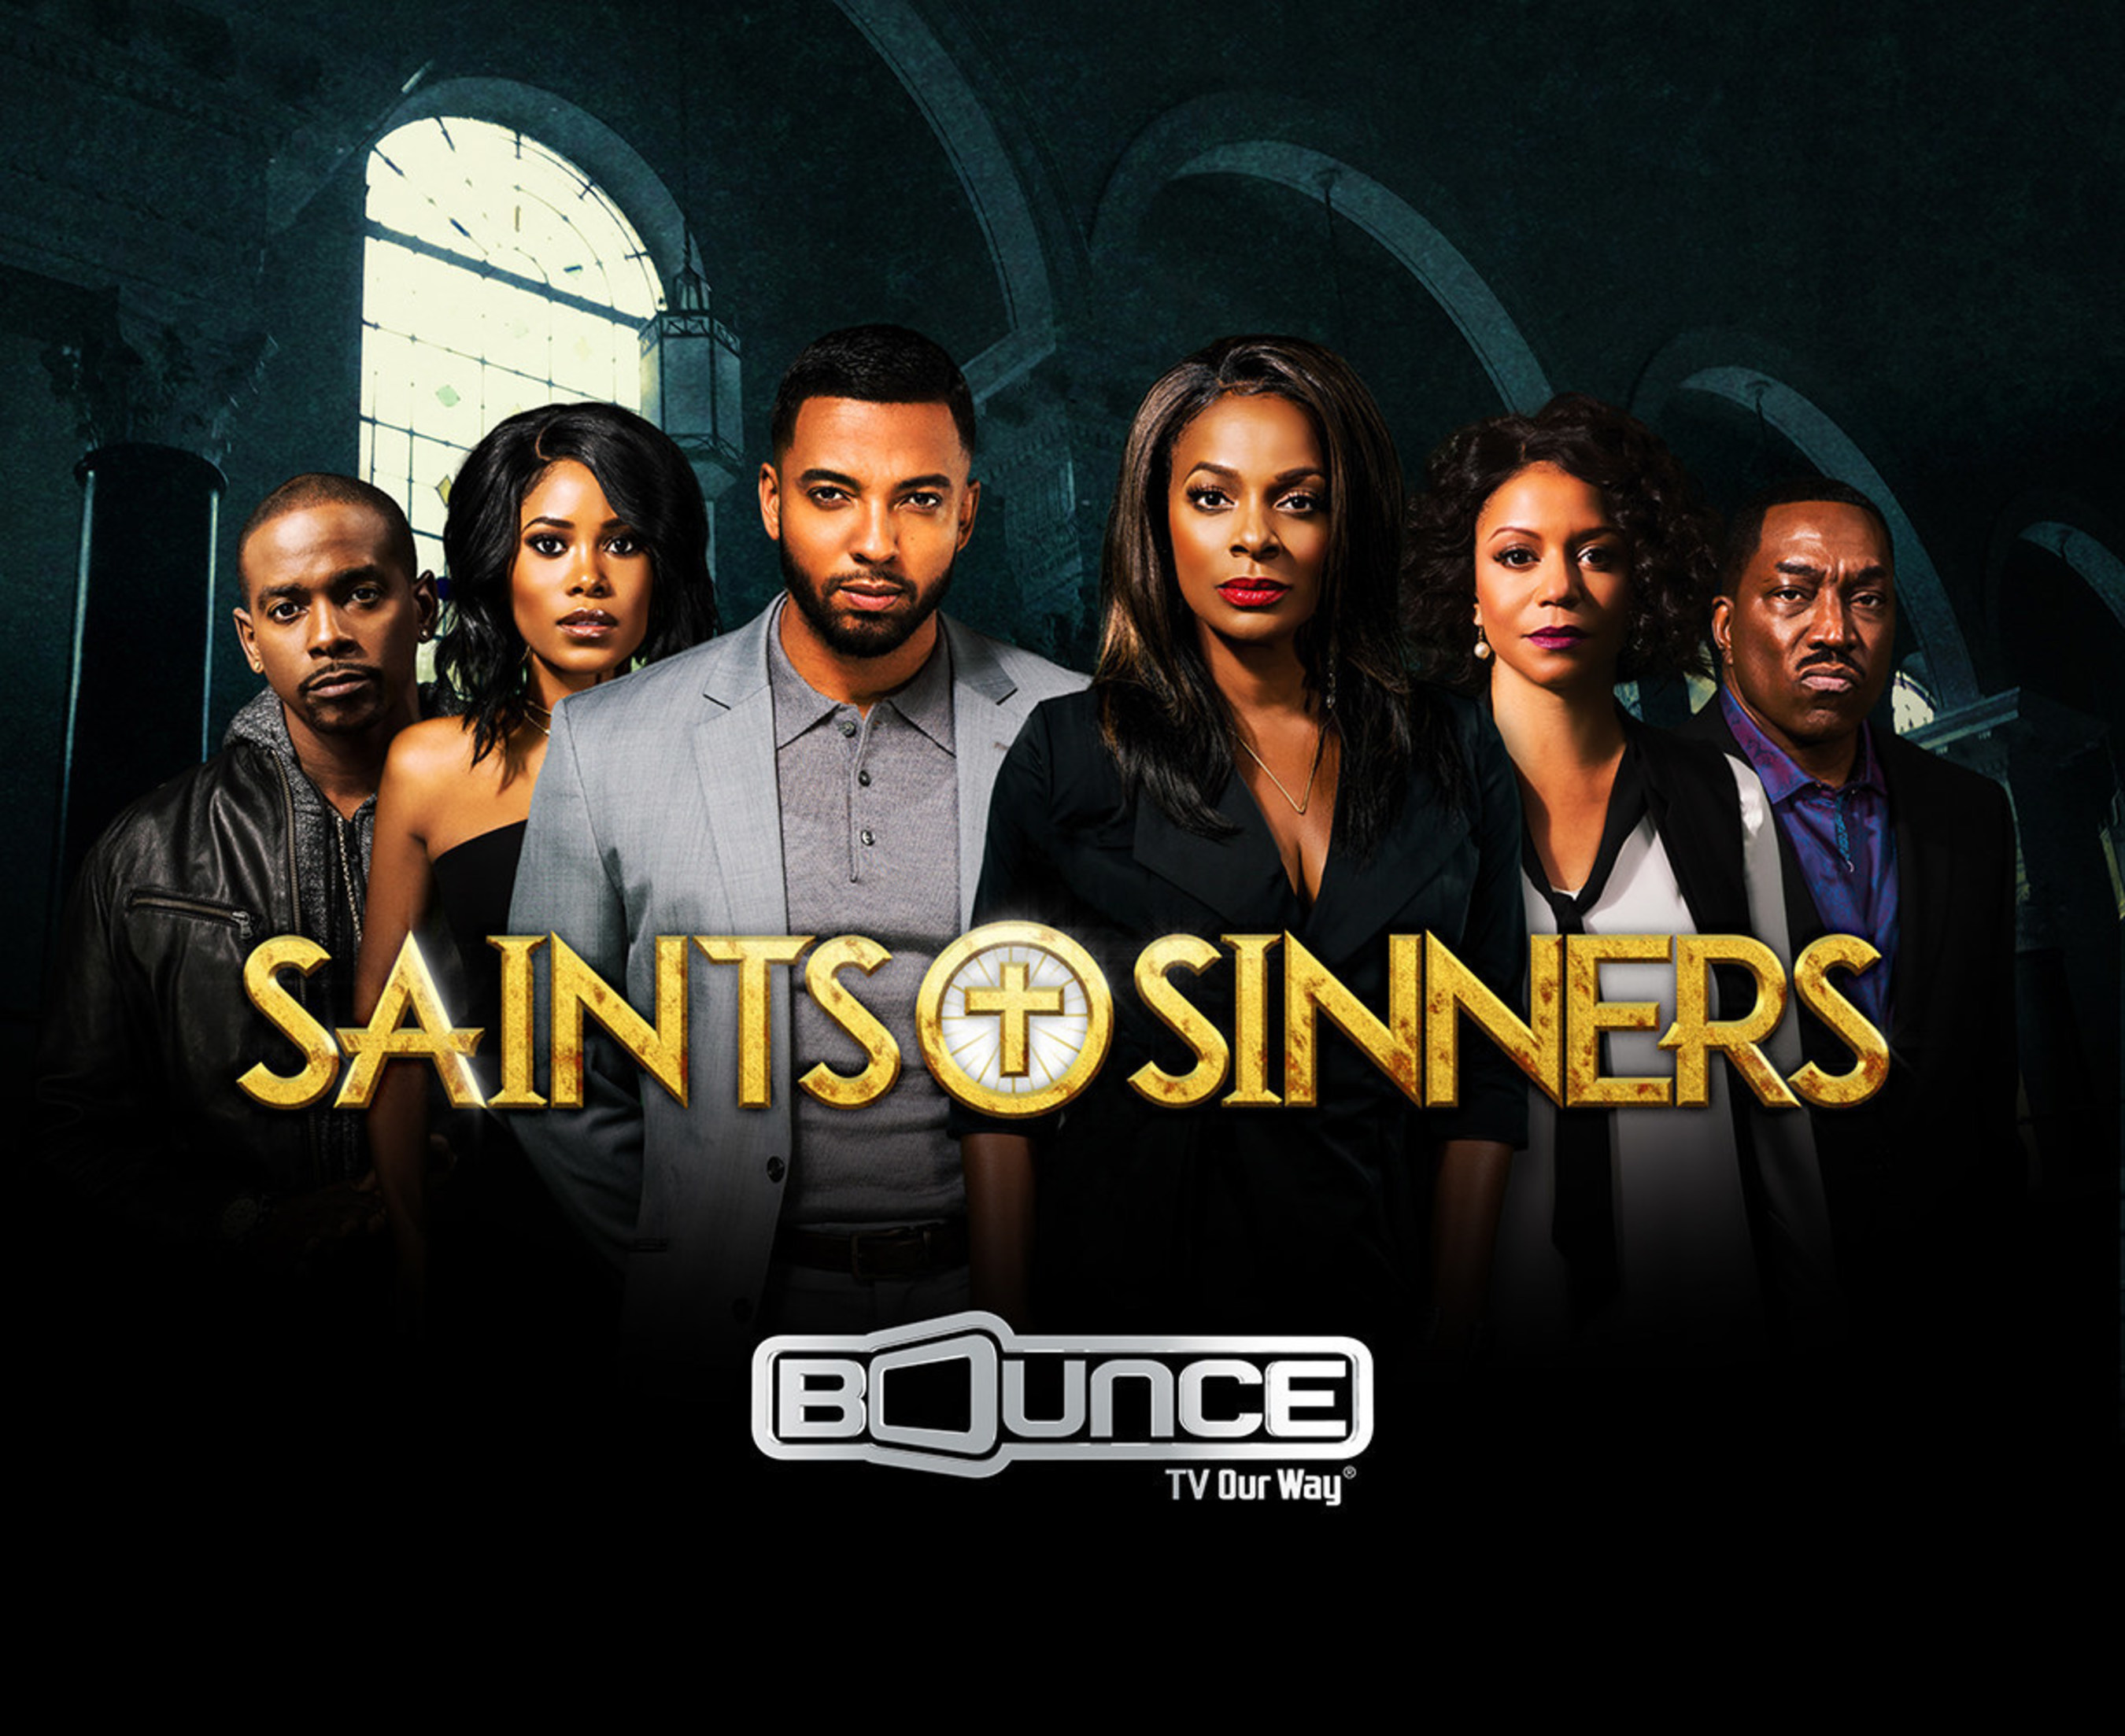 Bounce TV's first-ever original drama series Saints & Sinners is a smash hit. New episodes debut Sunday nights at 9:00 p.m. ET.  Visit BounceTV.com for local channel information.